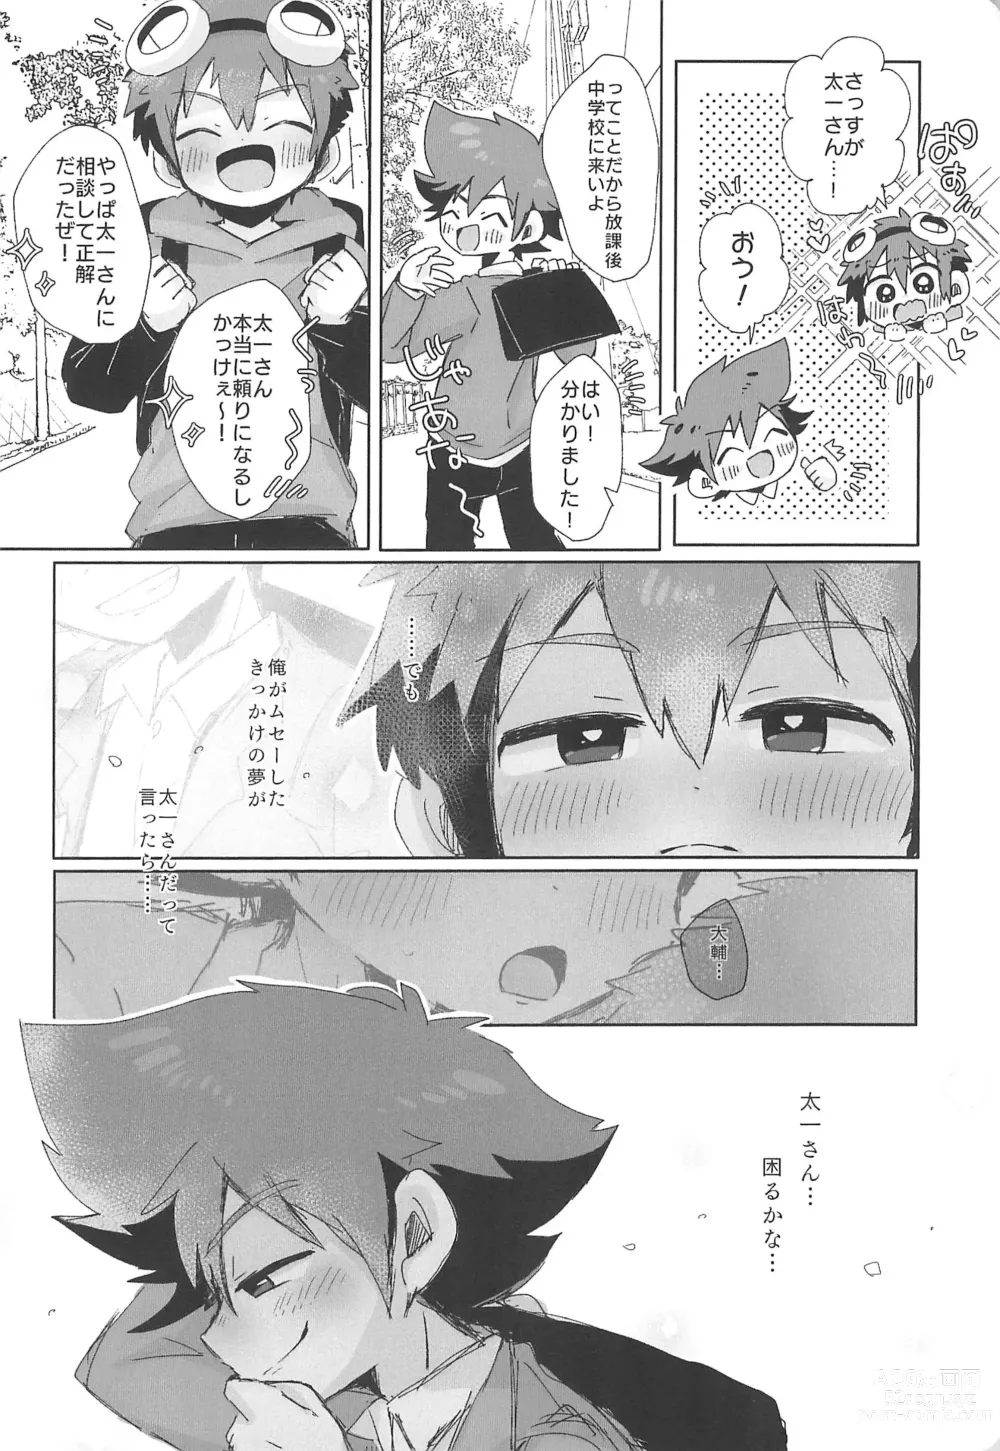 Page 12 of doujinshi Re:Re: